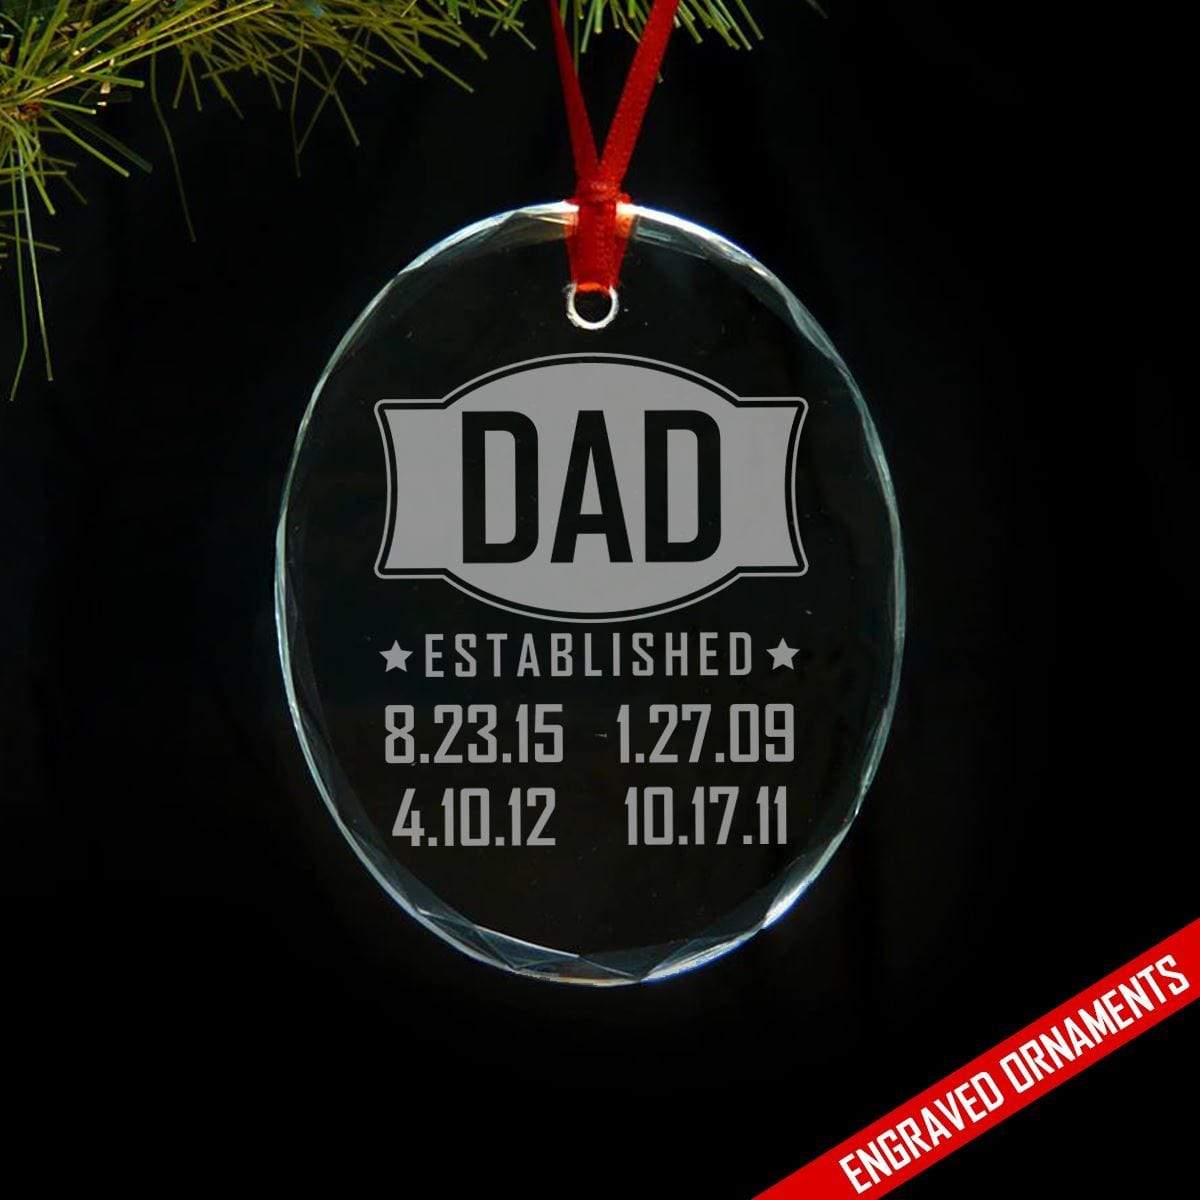 Dad Established PERSONALIZED Engraved Glass Ornament ZLAZER Oval Ornament 